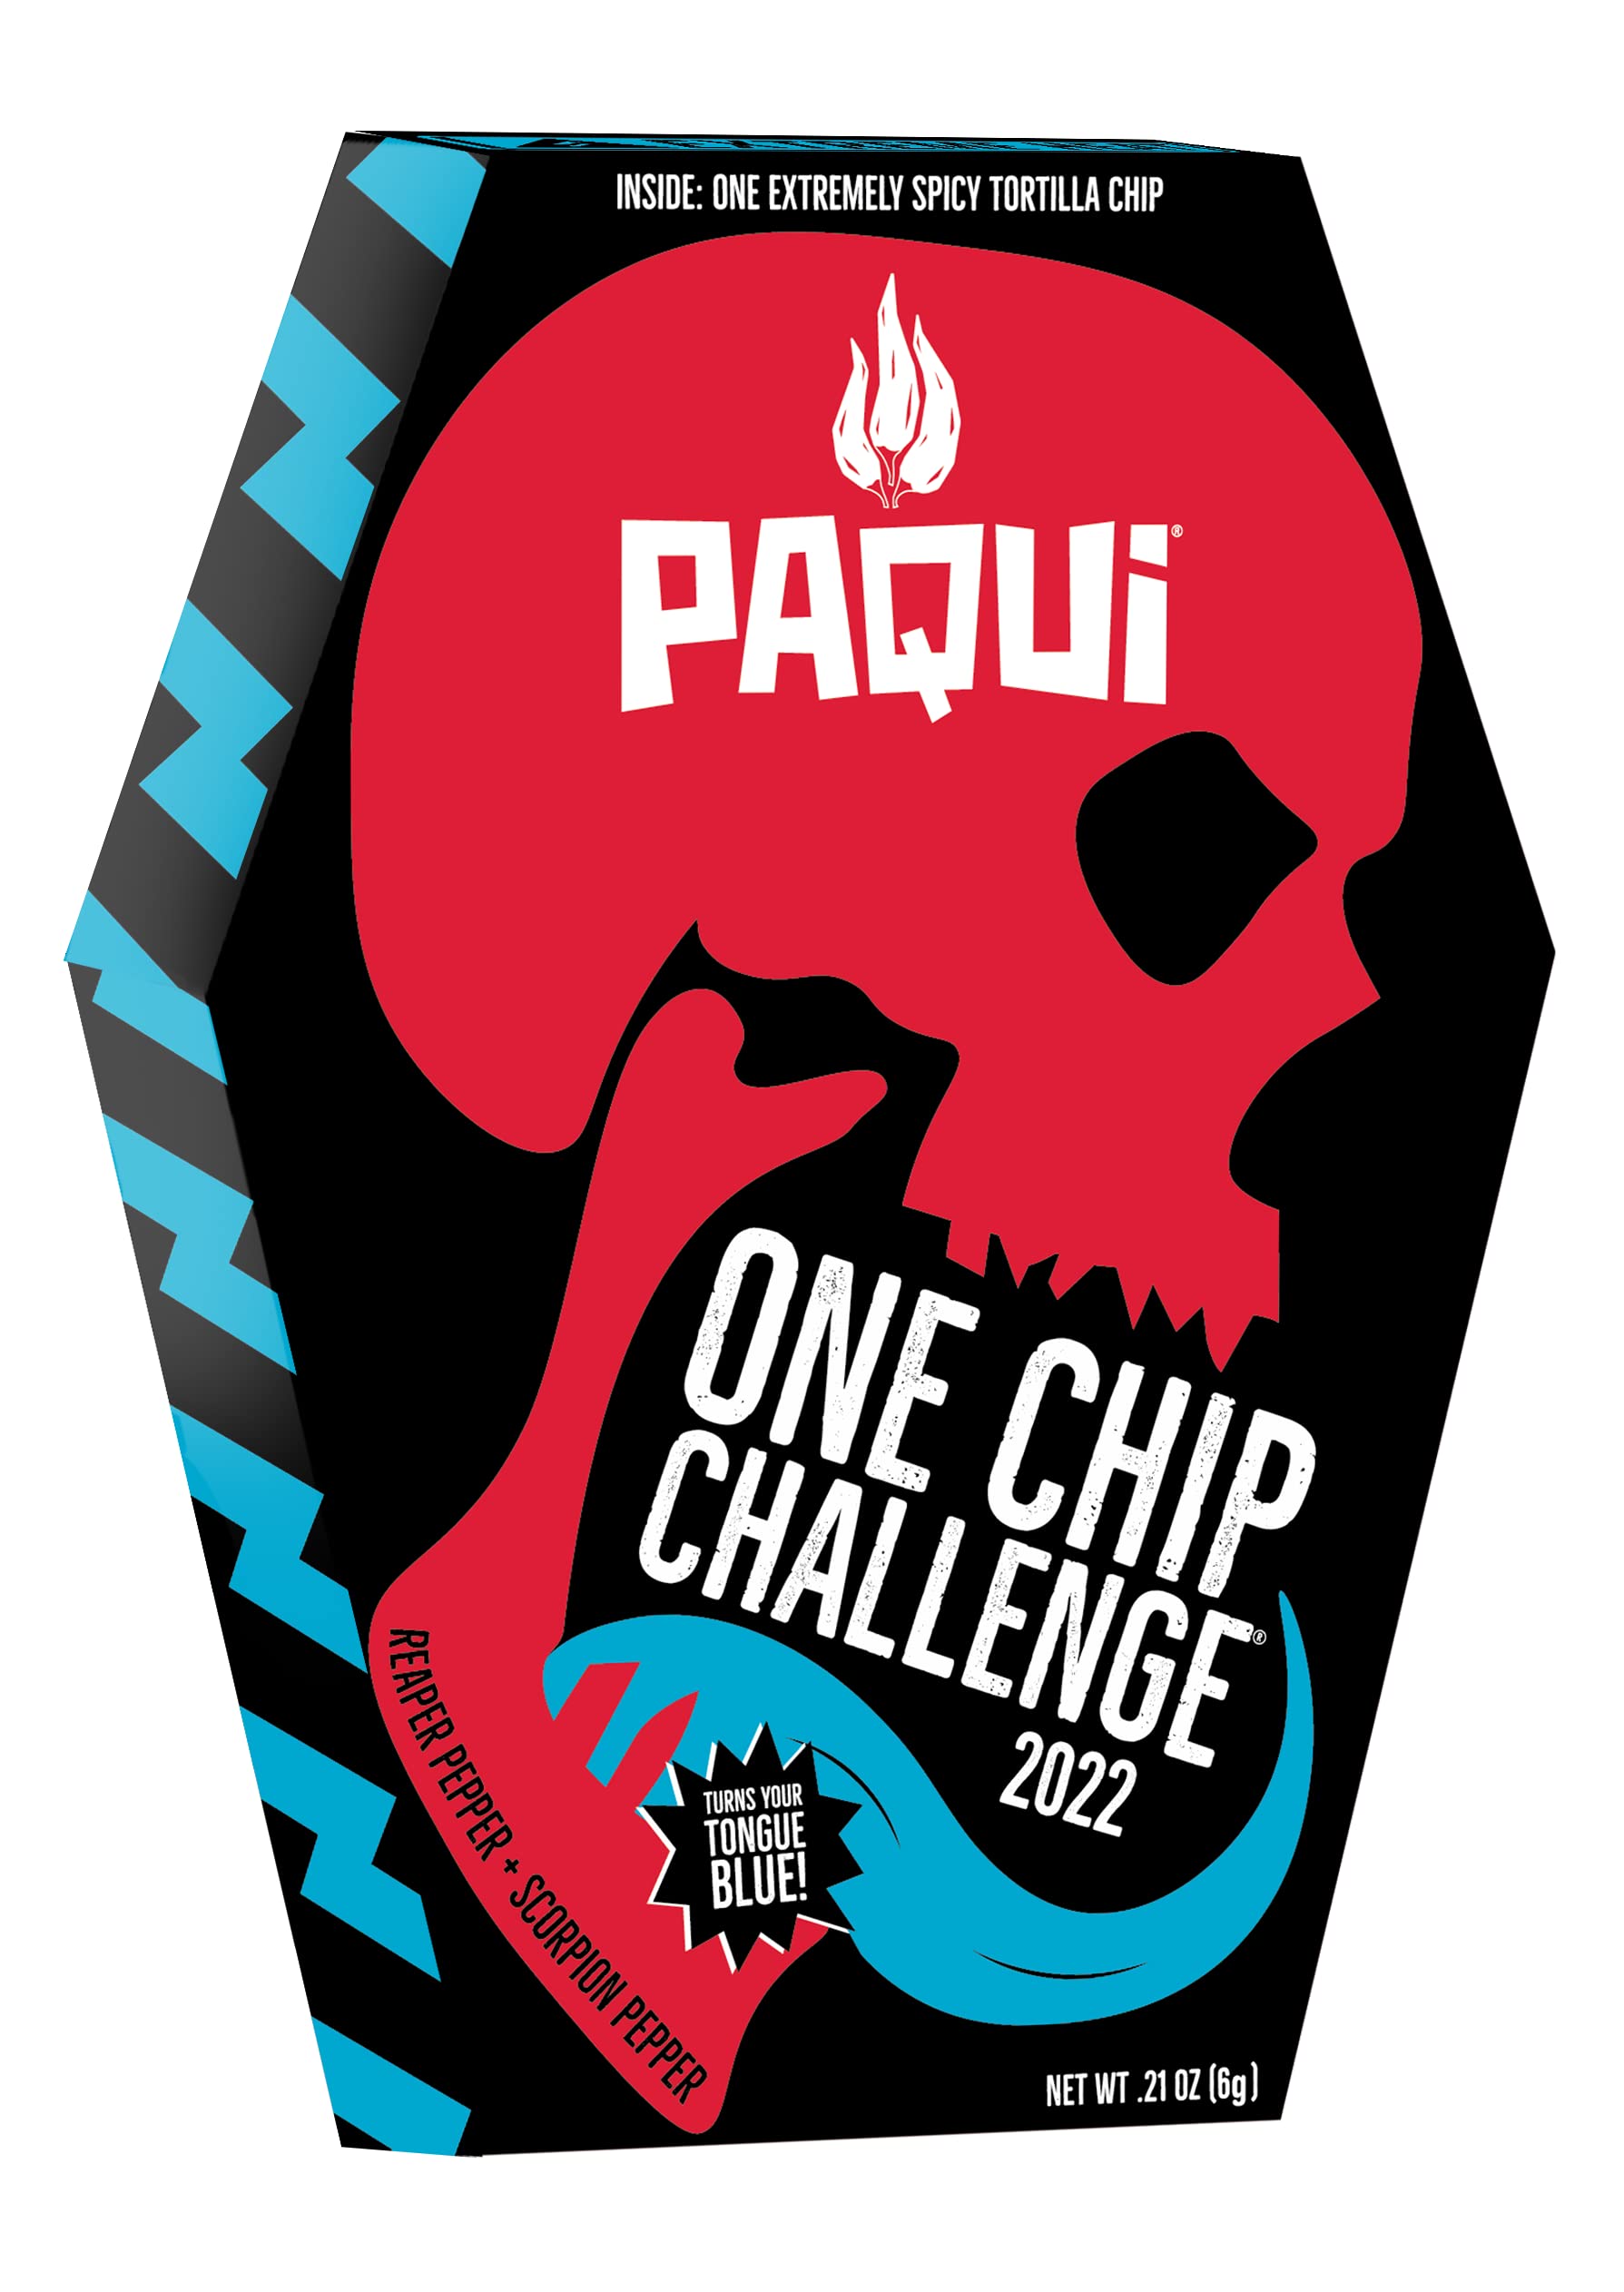 Paqui One Chip Challenge: Everything to know about the viral trend as  Pearland ISD bans spiciest chip from schools